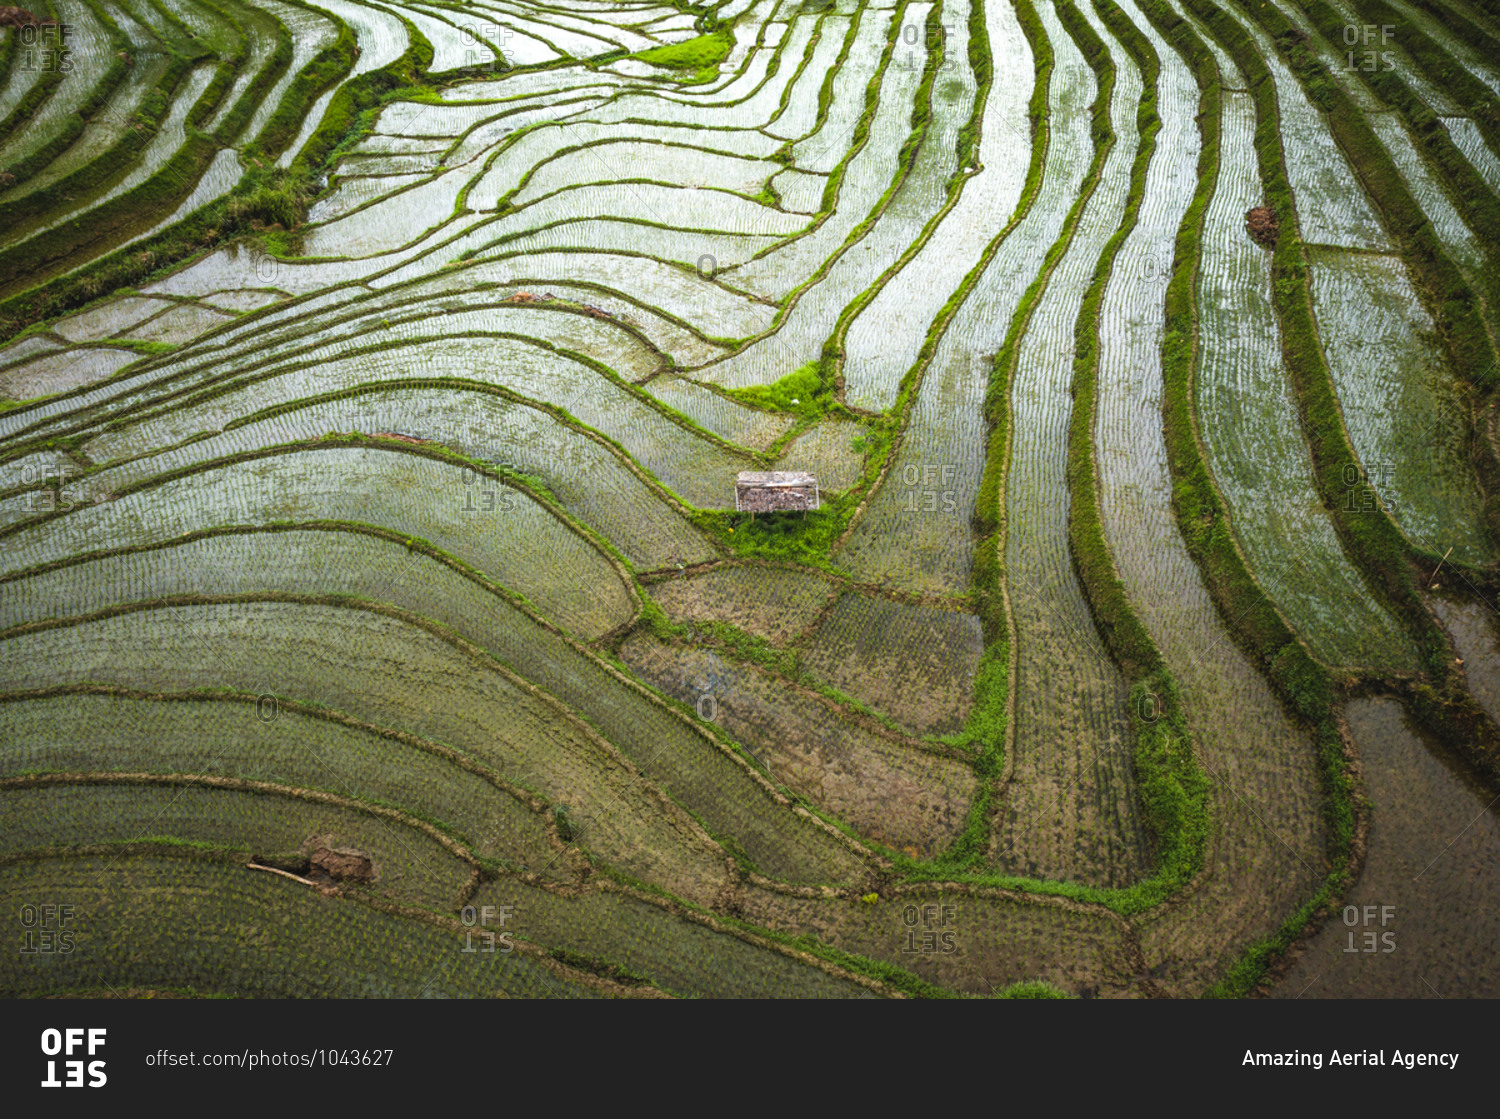 Aerial view of paddy rice fields in Guindulman region, the Philippines.